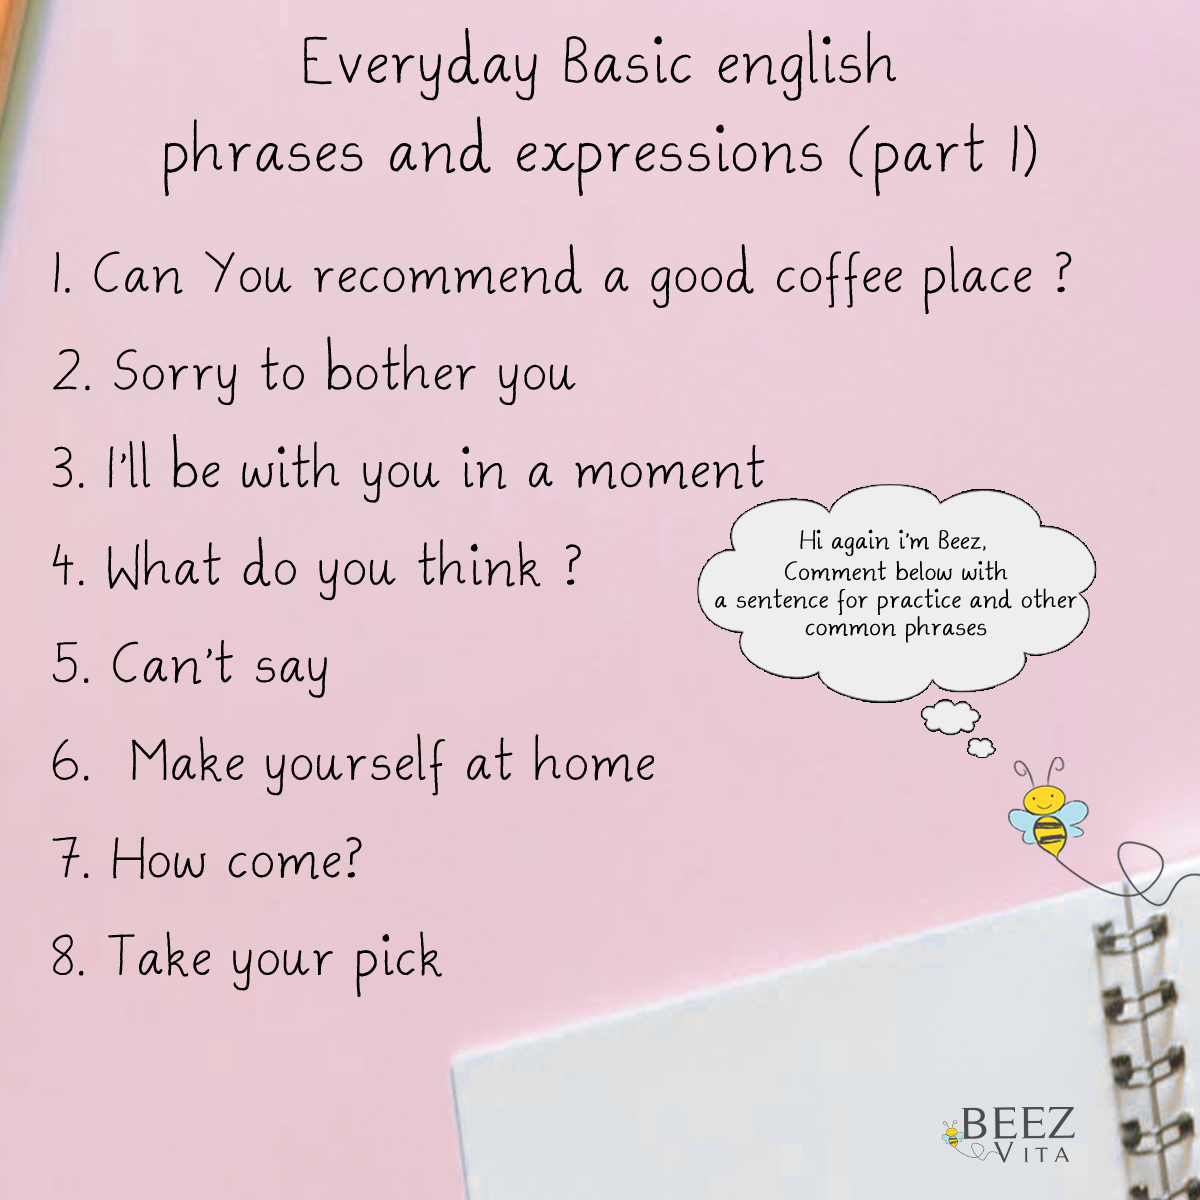 Beez Vita: Everyday Basic english phrases and expressions part 1